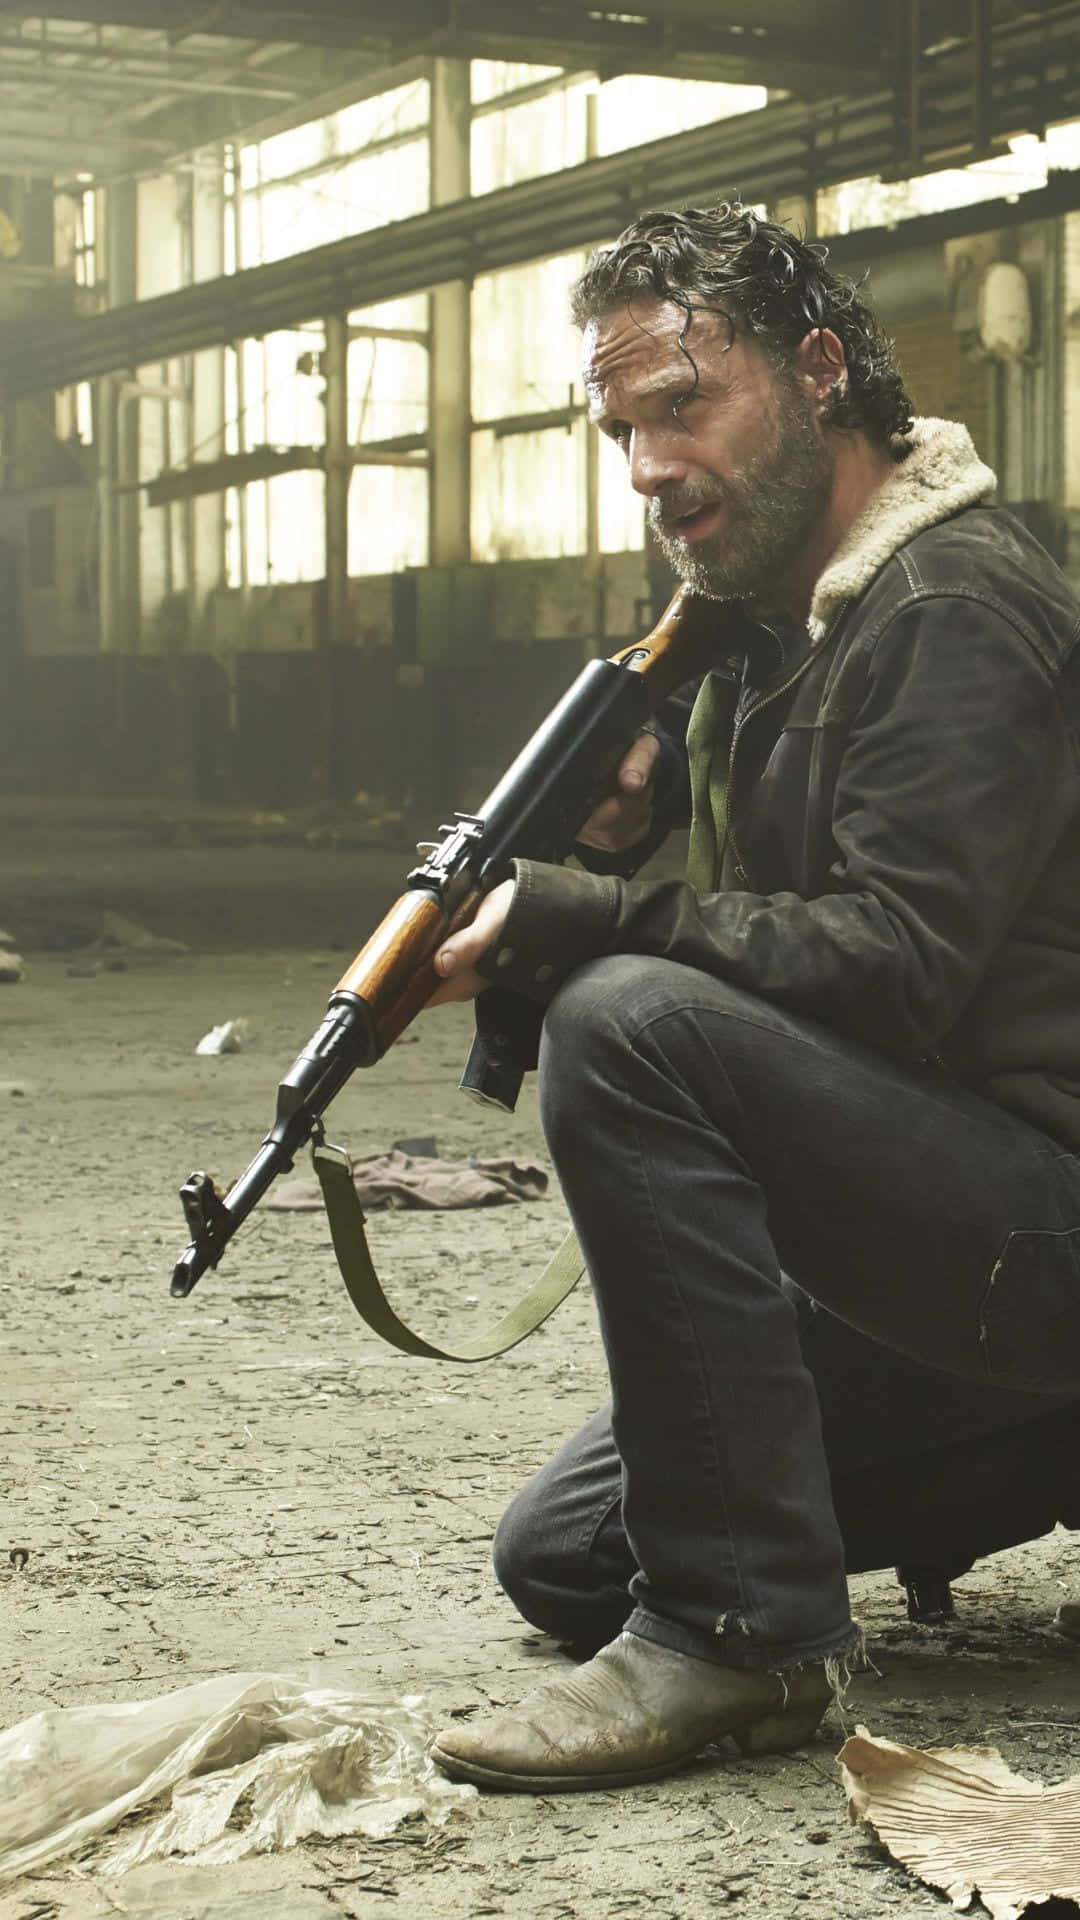 Get Ready for the Latest Season of The Walking Dead with an iPhone Wallpaper